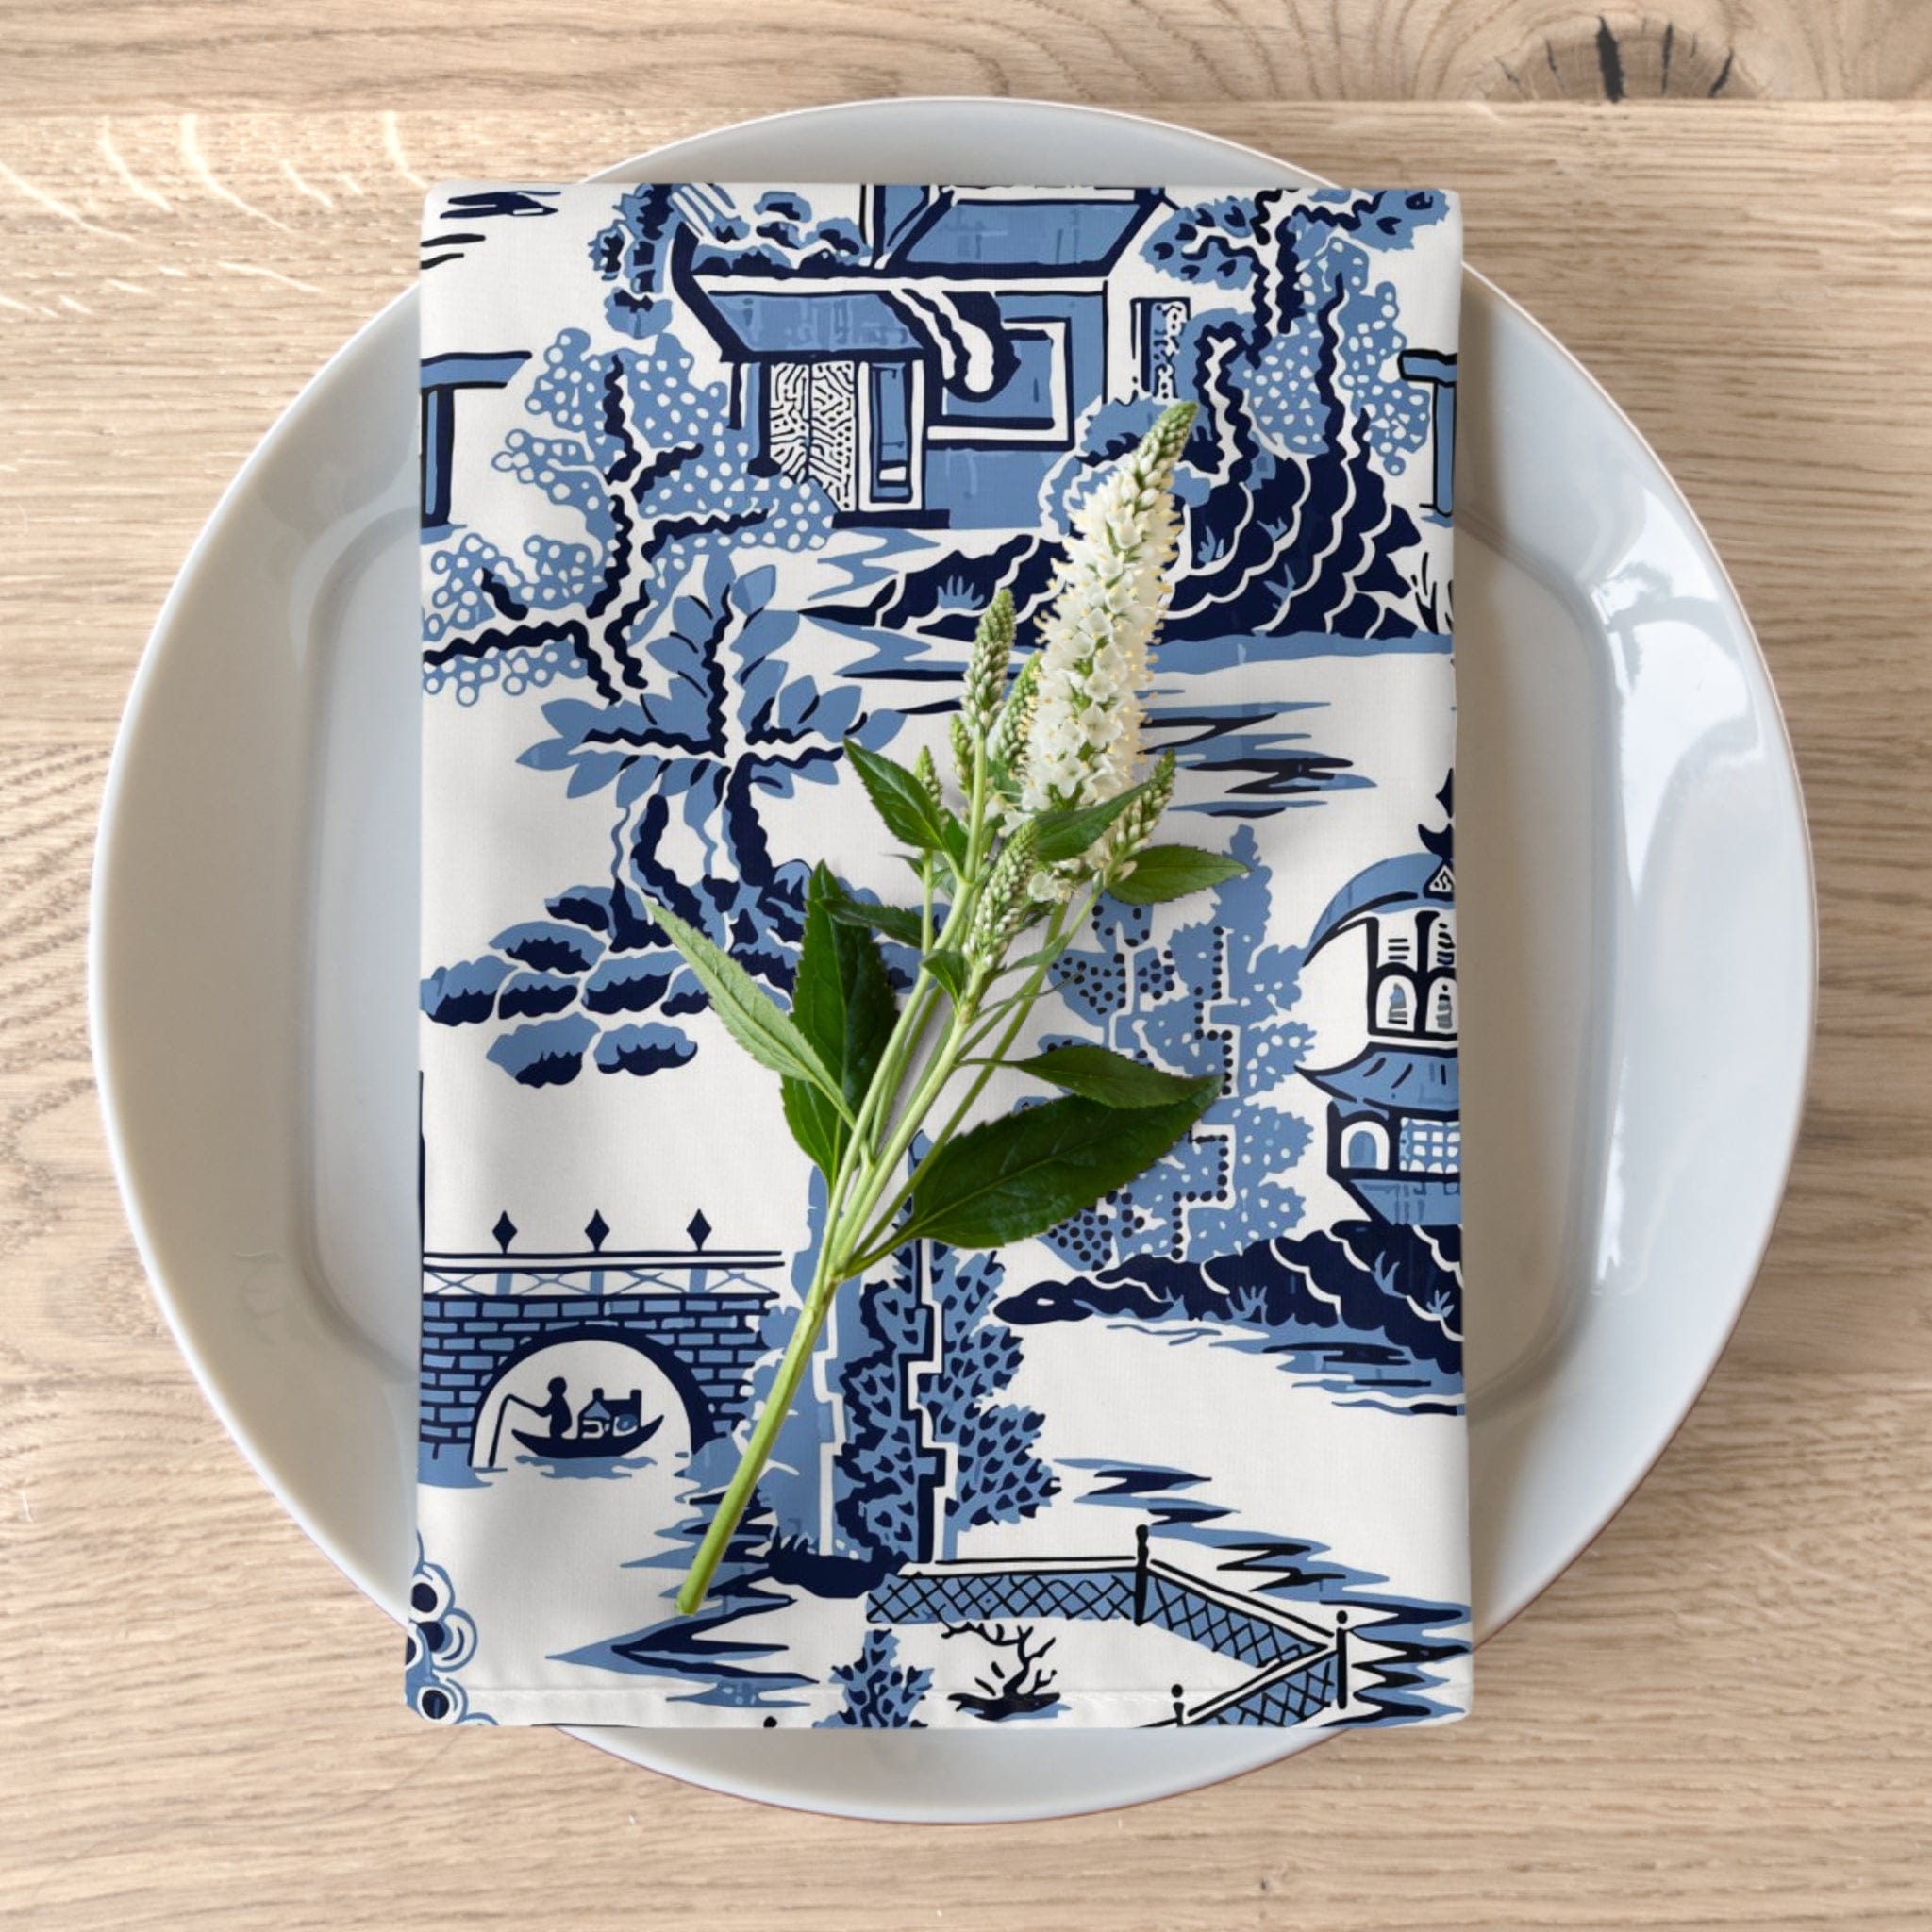 Kate McEnroe New York Blue Willow Pagoda Cloth Napkins, Set of 4, Traditional Blue White Asian Scene Dining Table Decor Napkins 4-piece set / 19&quot; × 19&quot; 28688040369189658596